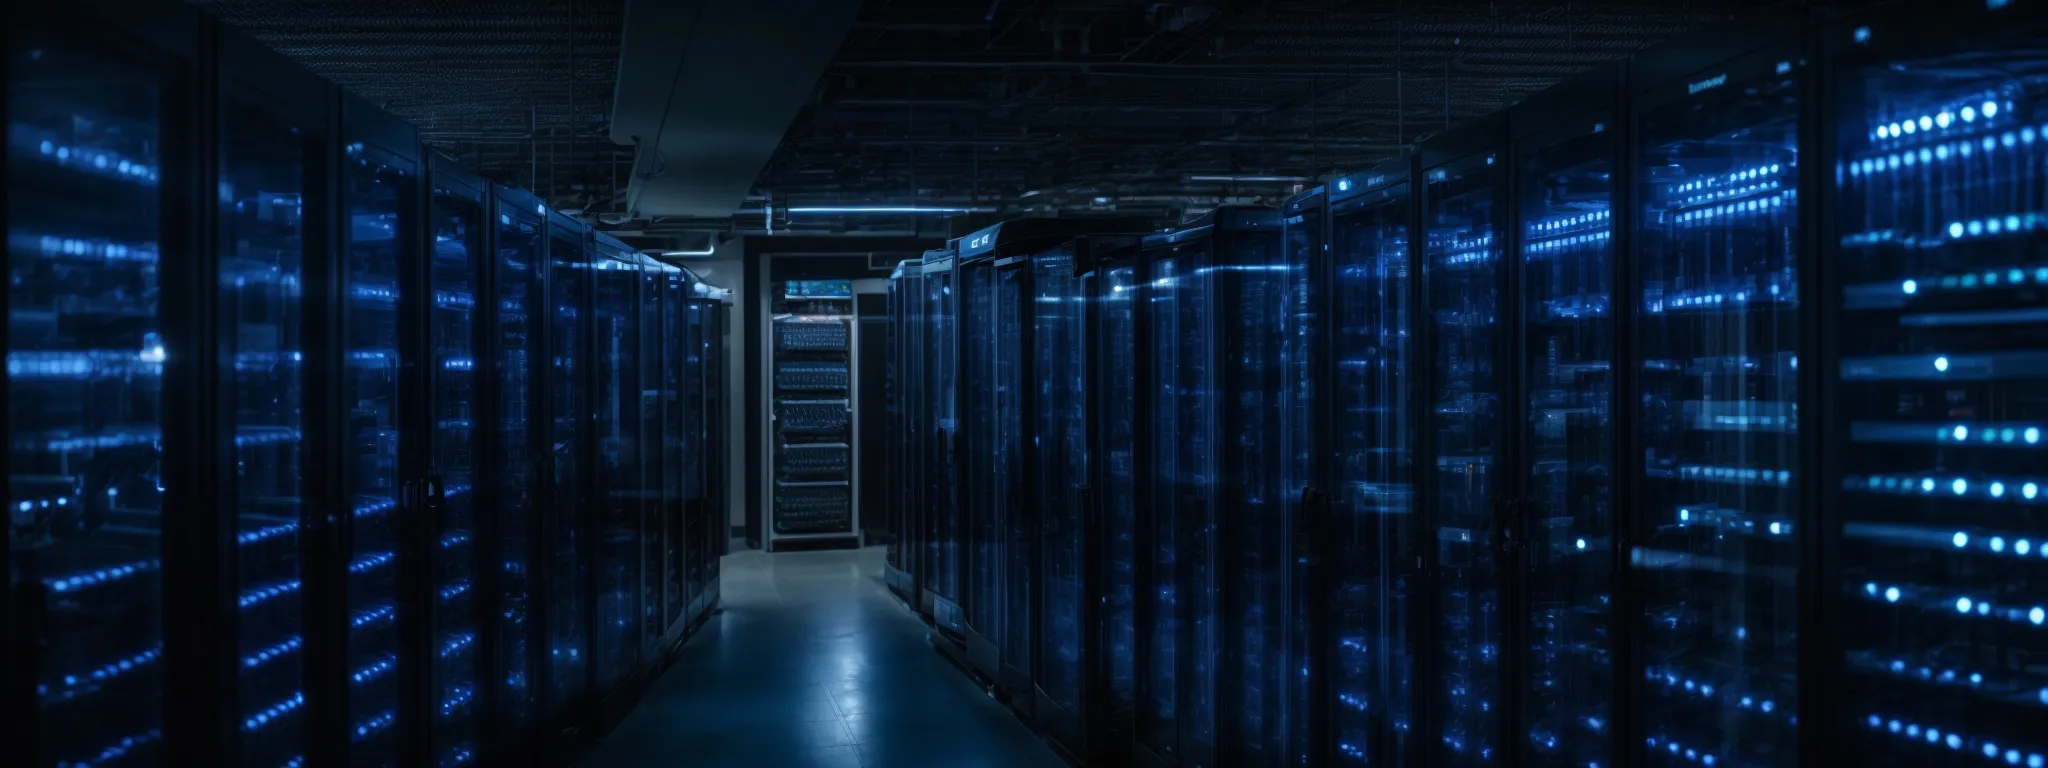 rows of server racks in a data center with glowing blue lights indicating active data processing and timestamp verification.